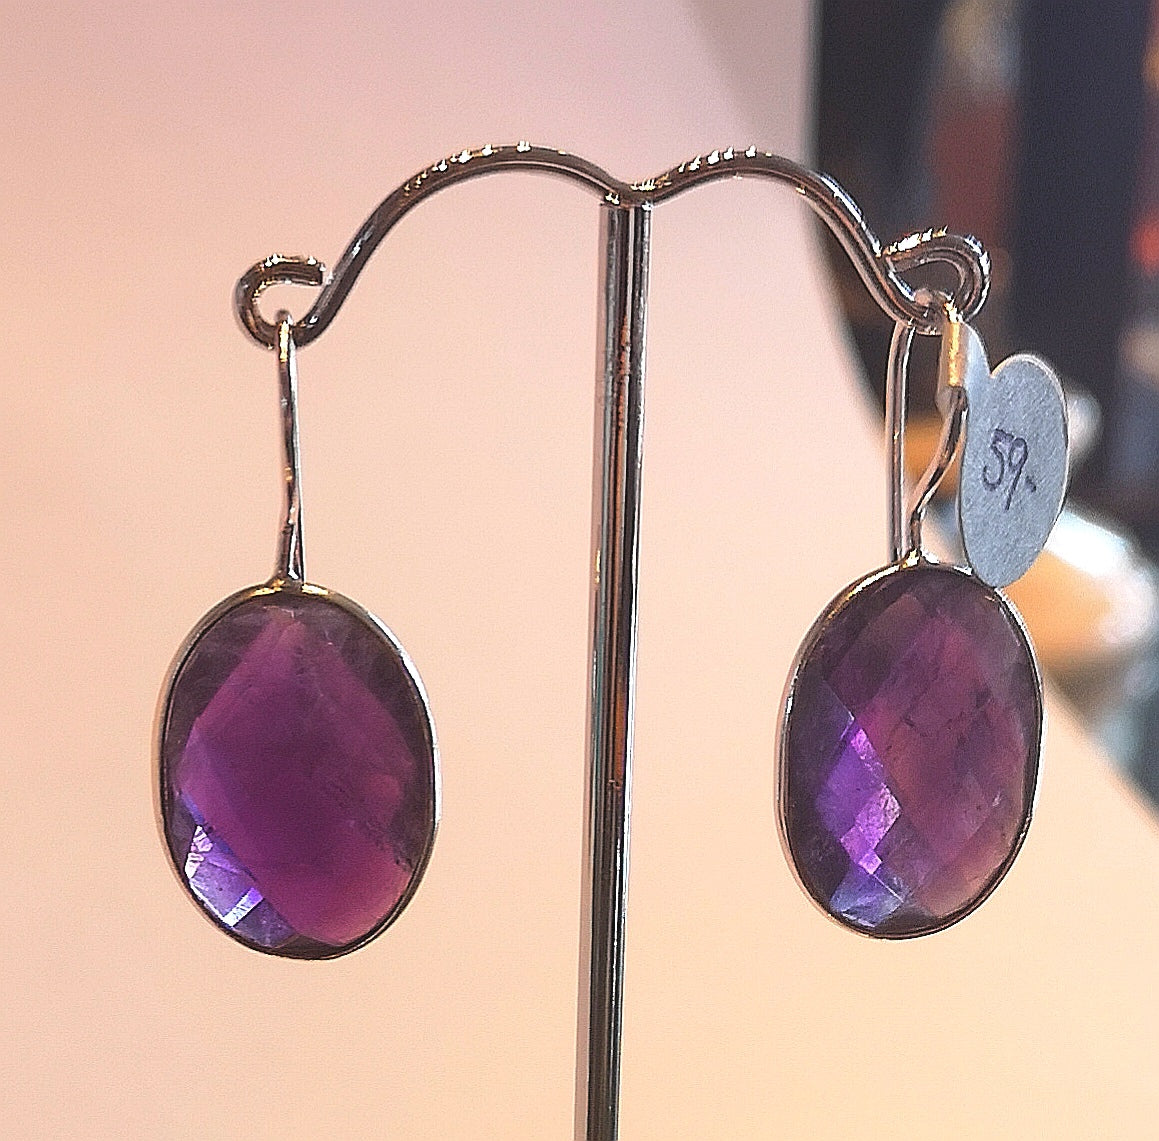 Large faceted oval amethyst earrings in sterling silver with rhodium finish